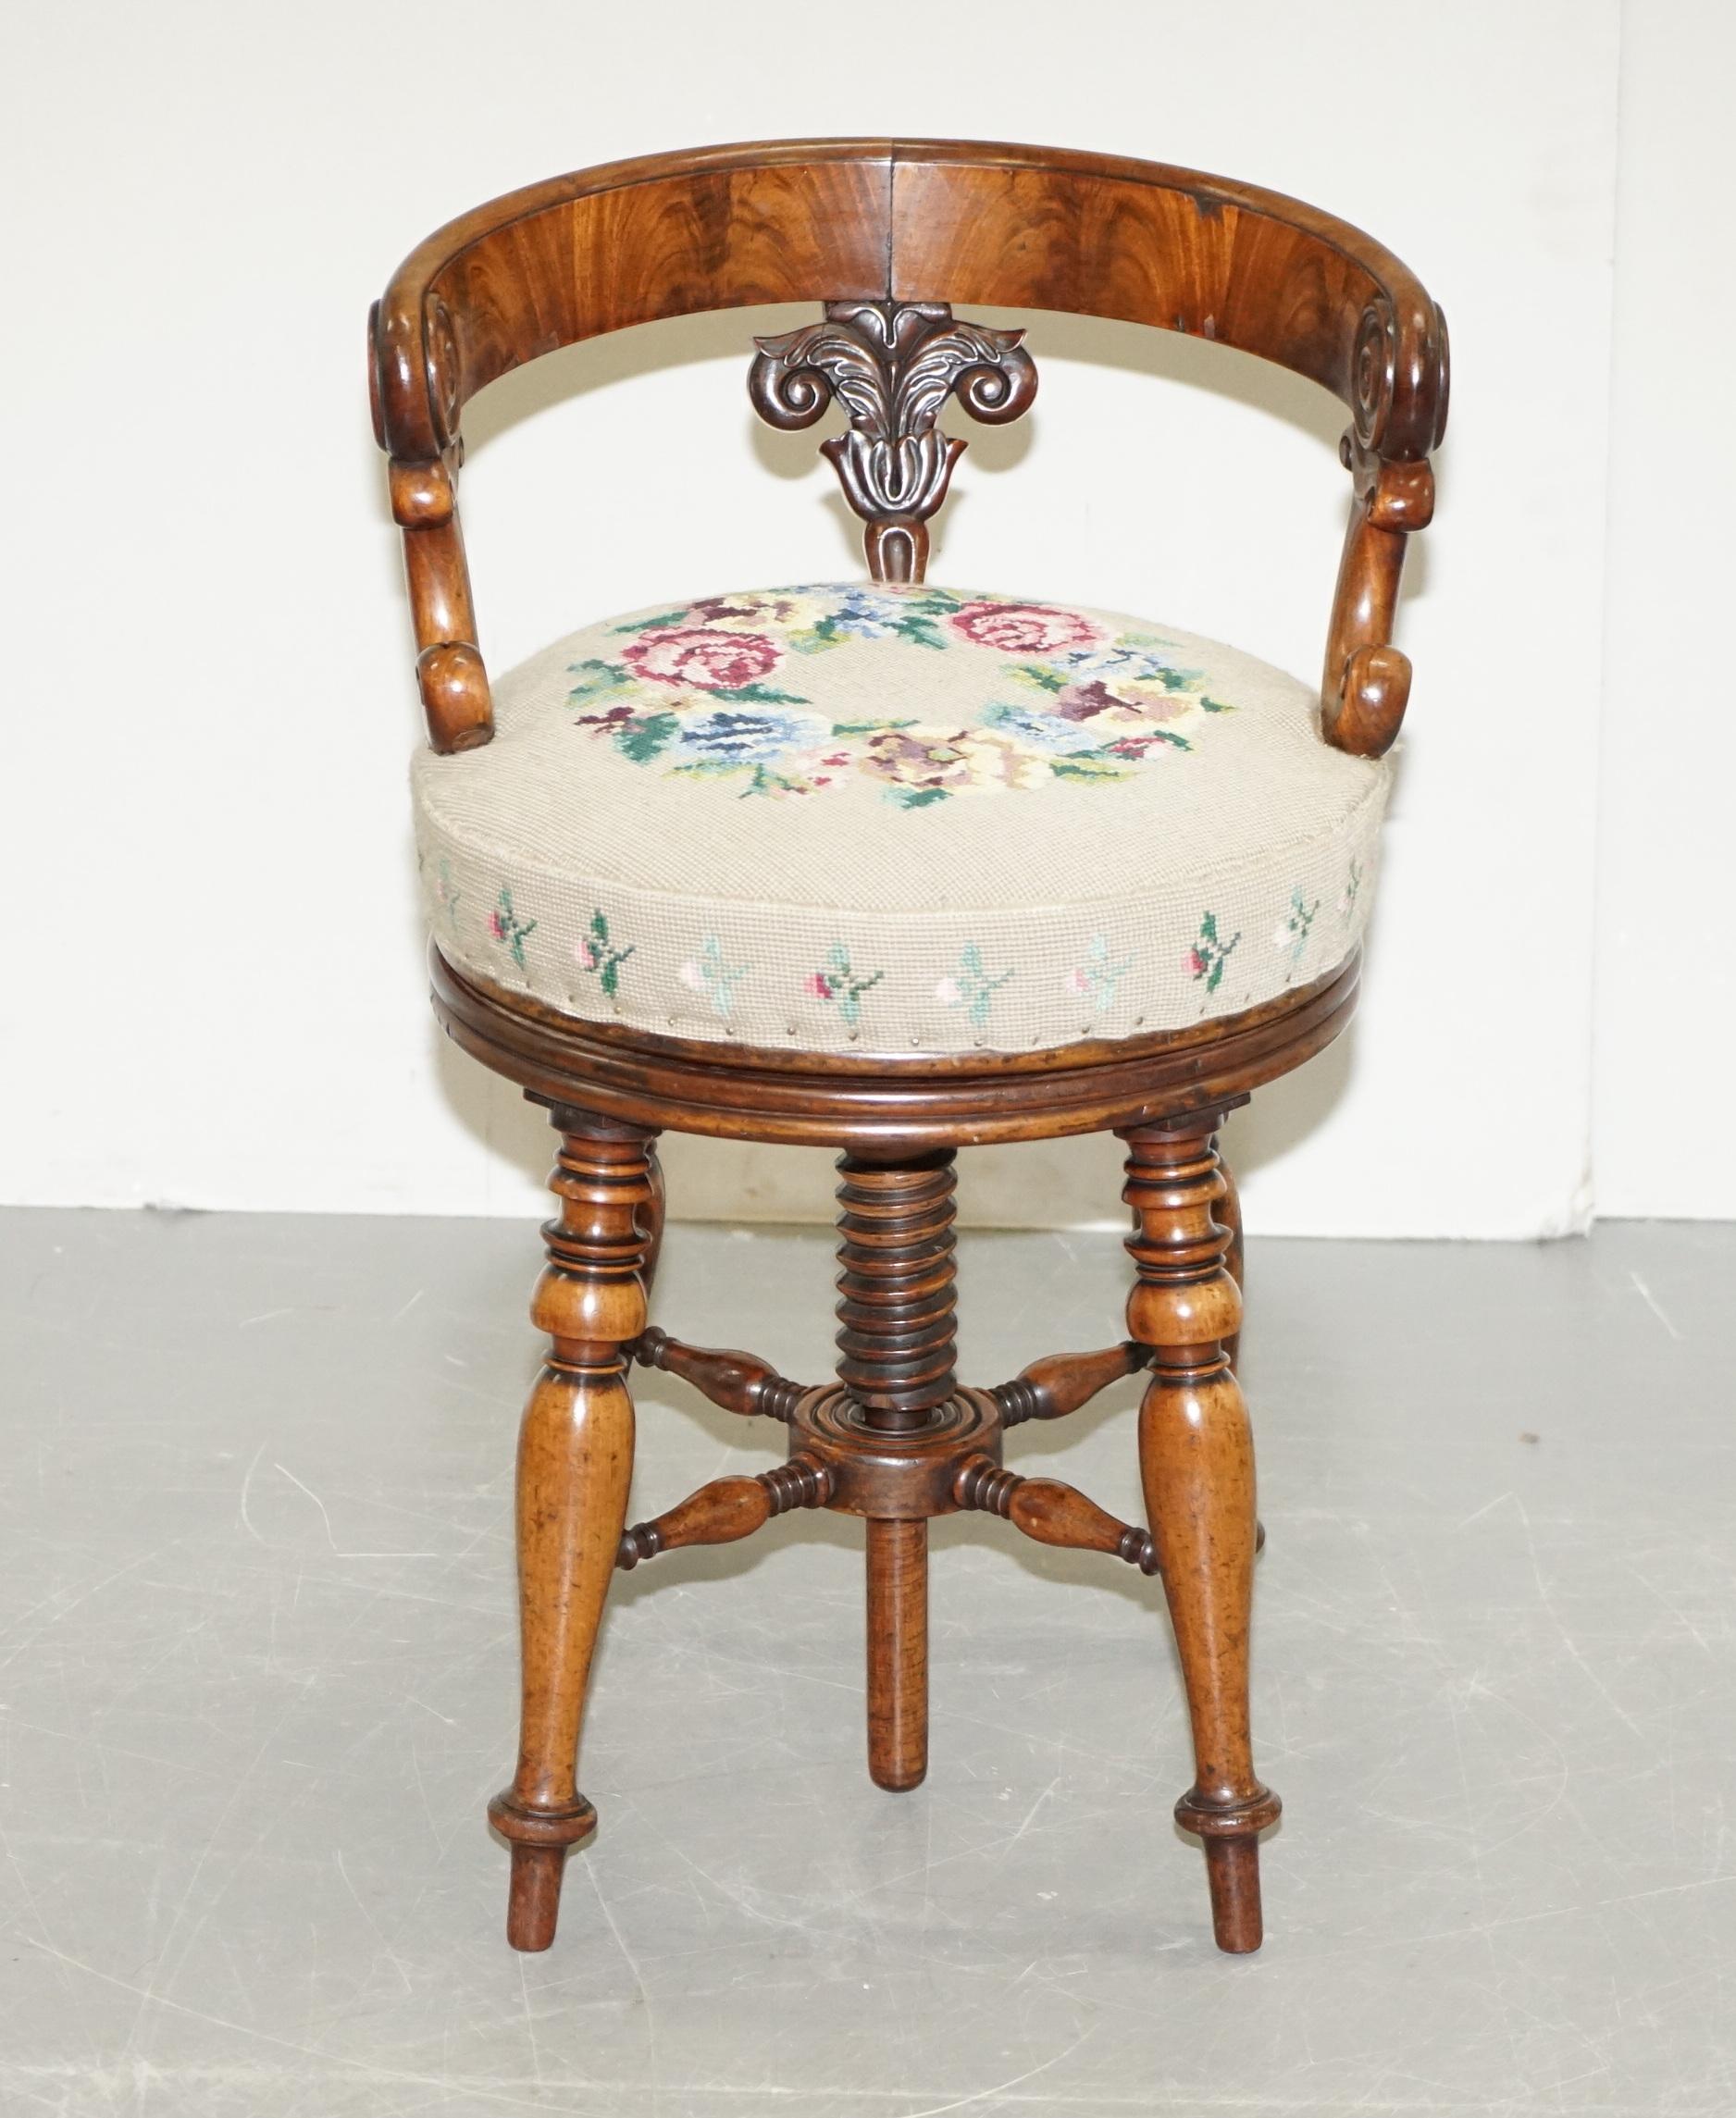 Wimbledon-Furniture

Wimbledon-Furniture is delighted to offer for sale this sublime circa 1830 William IV height adjustable musician’s stool

Please note the delivery fee listed is just a guide, it covers within the M25 only for the UK and